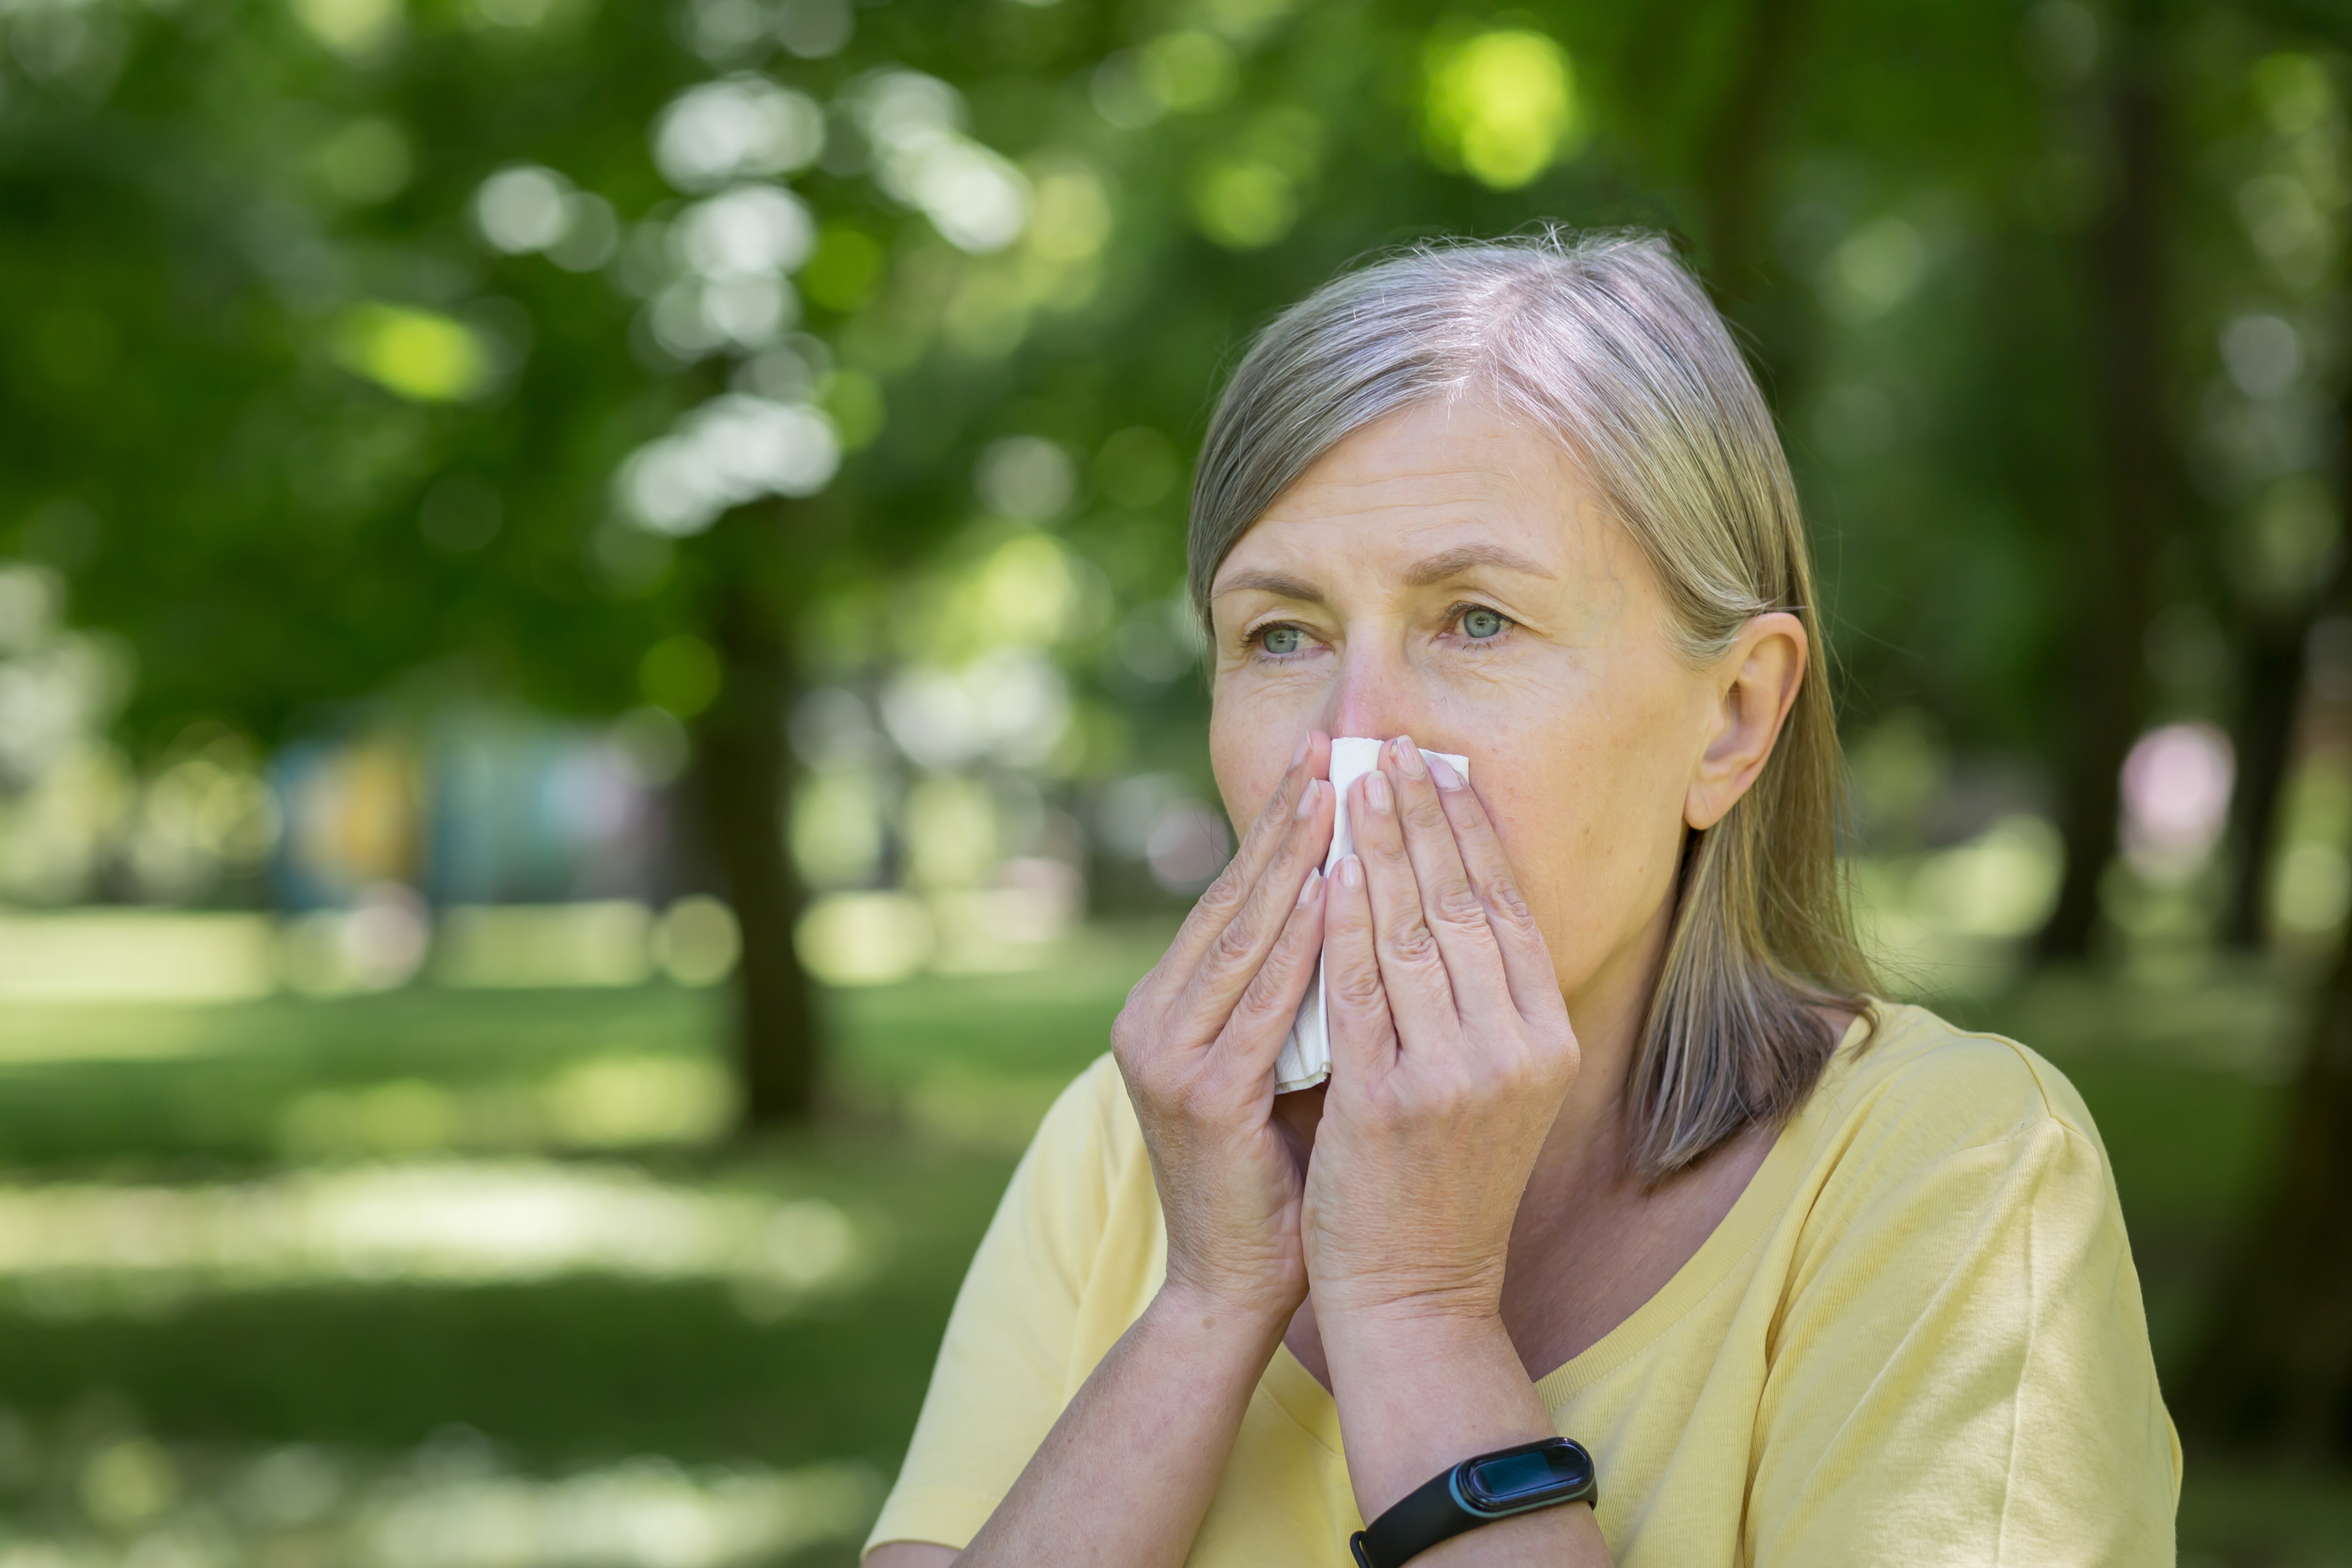 Your primary care physician working alongside your allergistcan better identify symptoms of allergies.